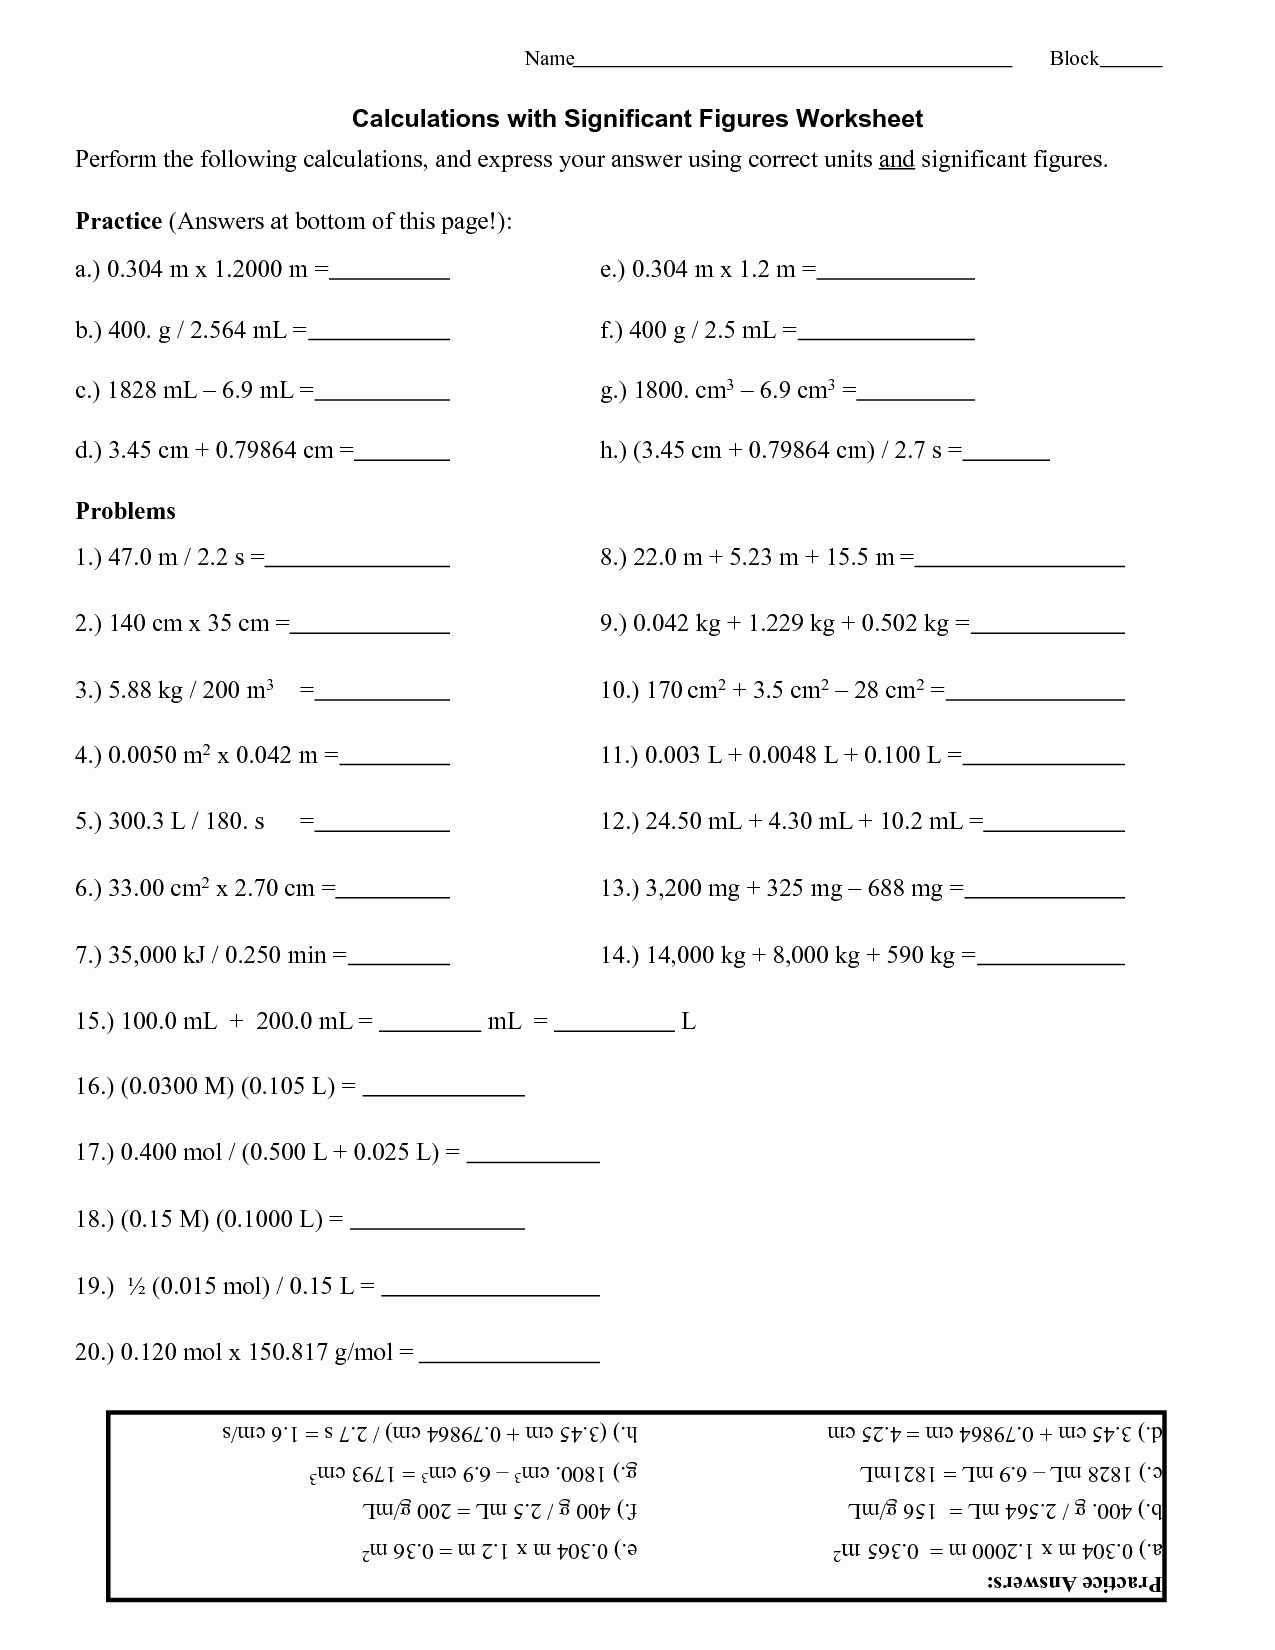 Significant Figures Worksheet Answers Best Of 8 Best Of Significant Figures Worksheet with Answer